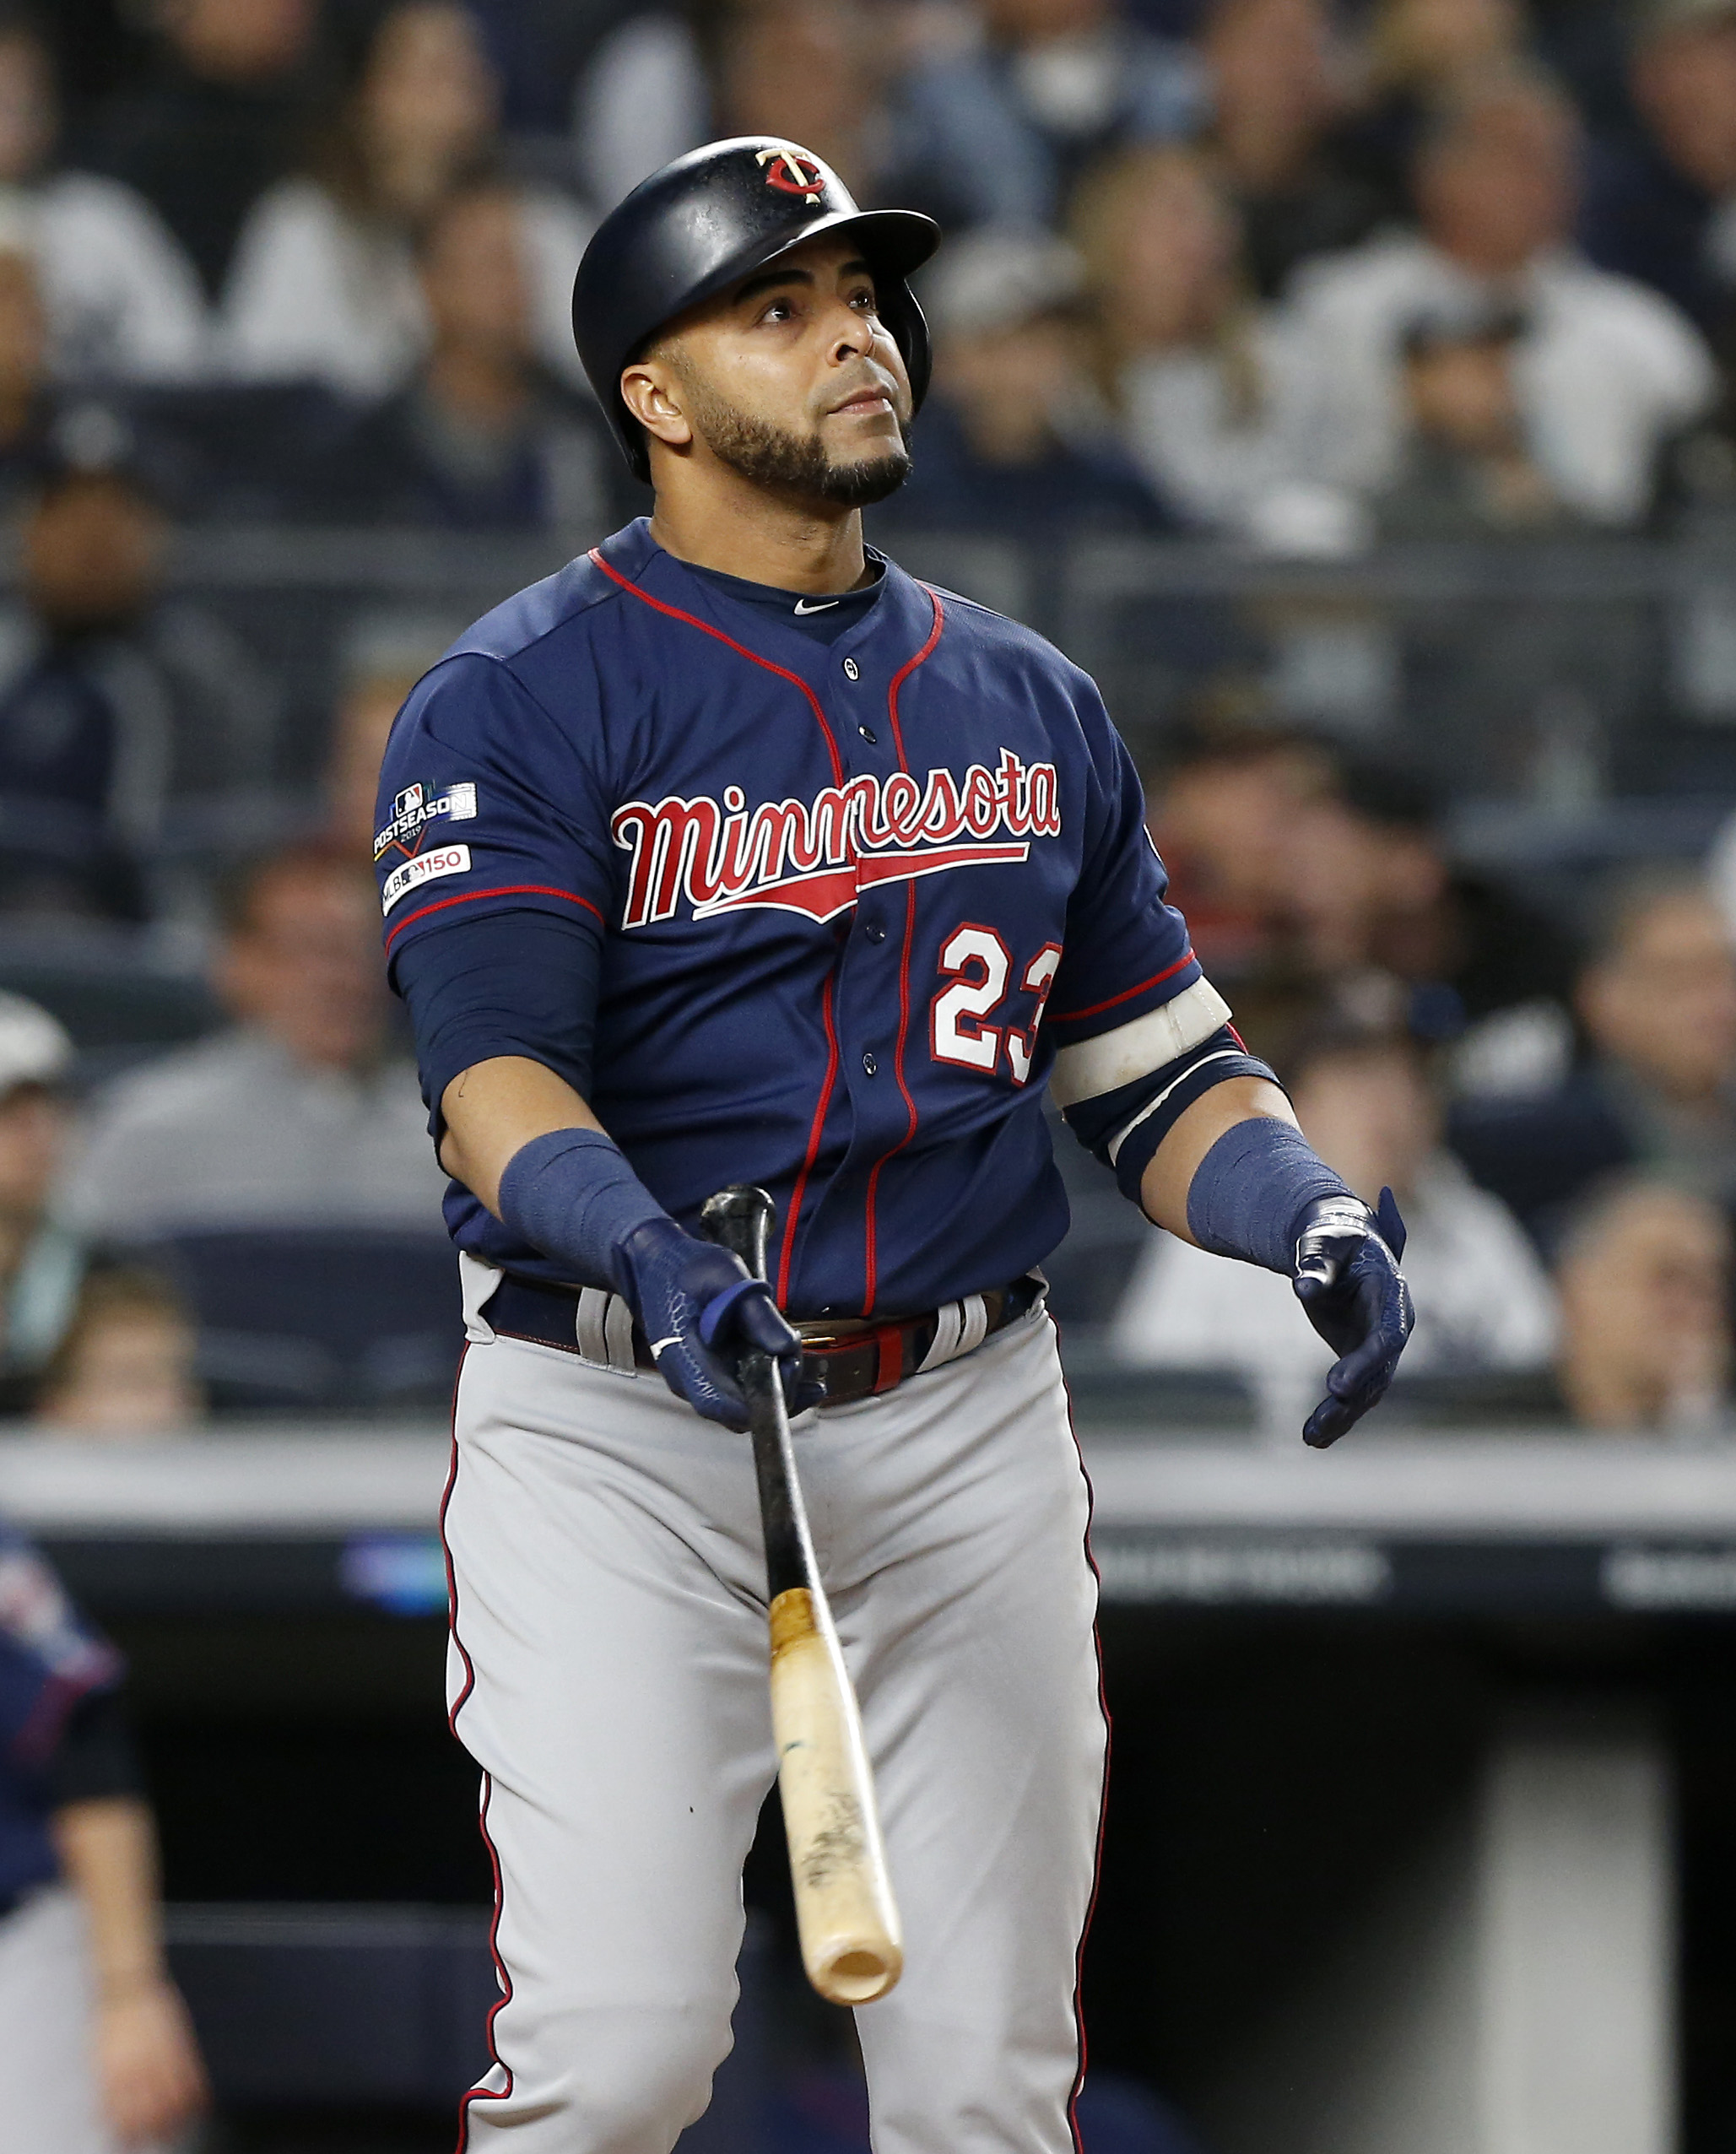 Nelson Cruz #23 of the Minnesota Twins follows through on a third inning home run against the New York Yankees in game one of the American League Division Series at Yankee Stadium on October 04, 2019 in New York City. The Yankees defeated the Twins 10-4.